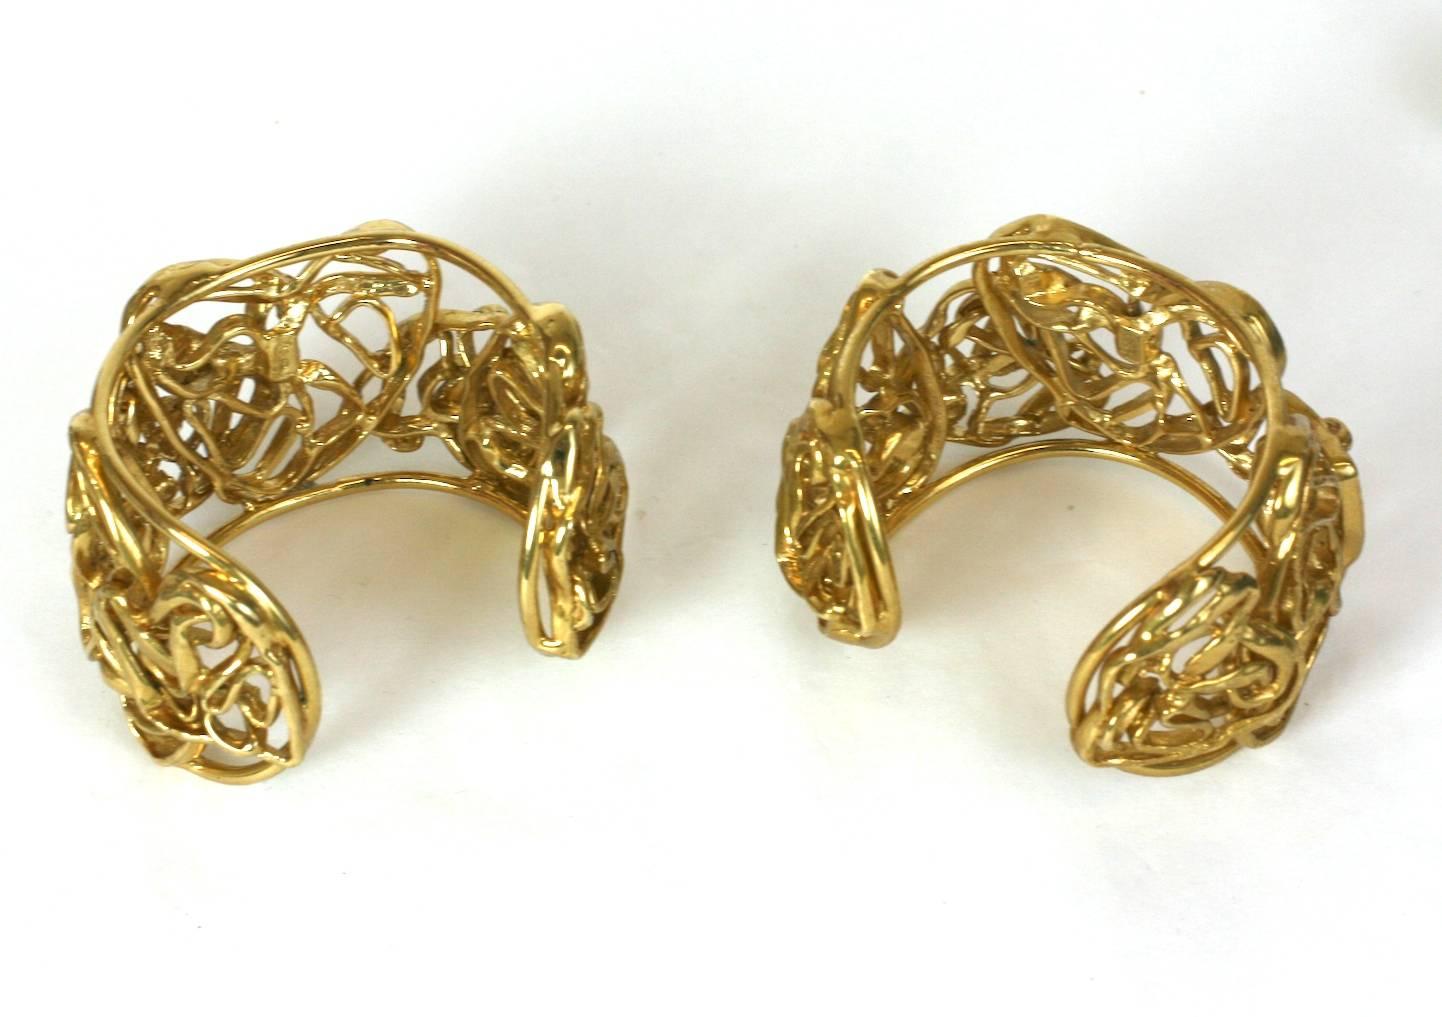 Yves Saint Laurent Sculptural Heart Cuffs In Excellent Condition For Sale In New York, NY